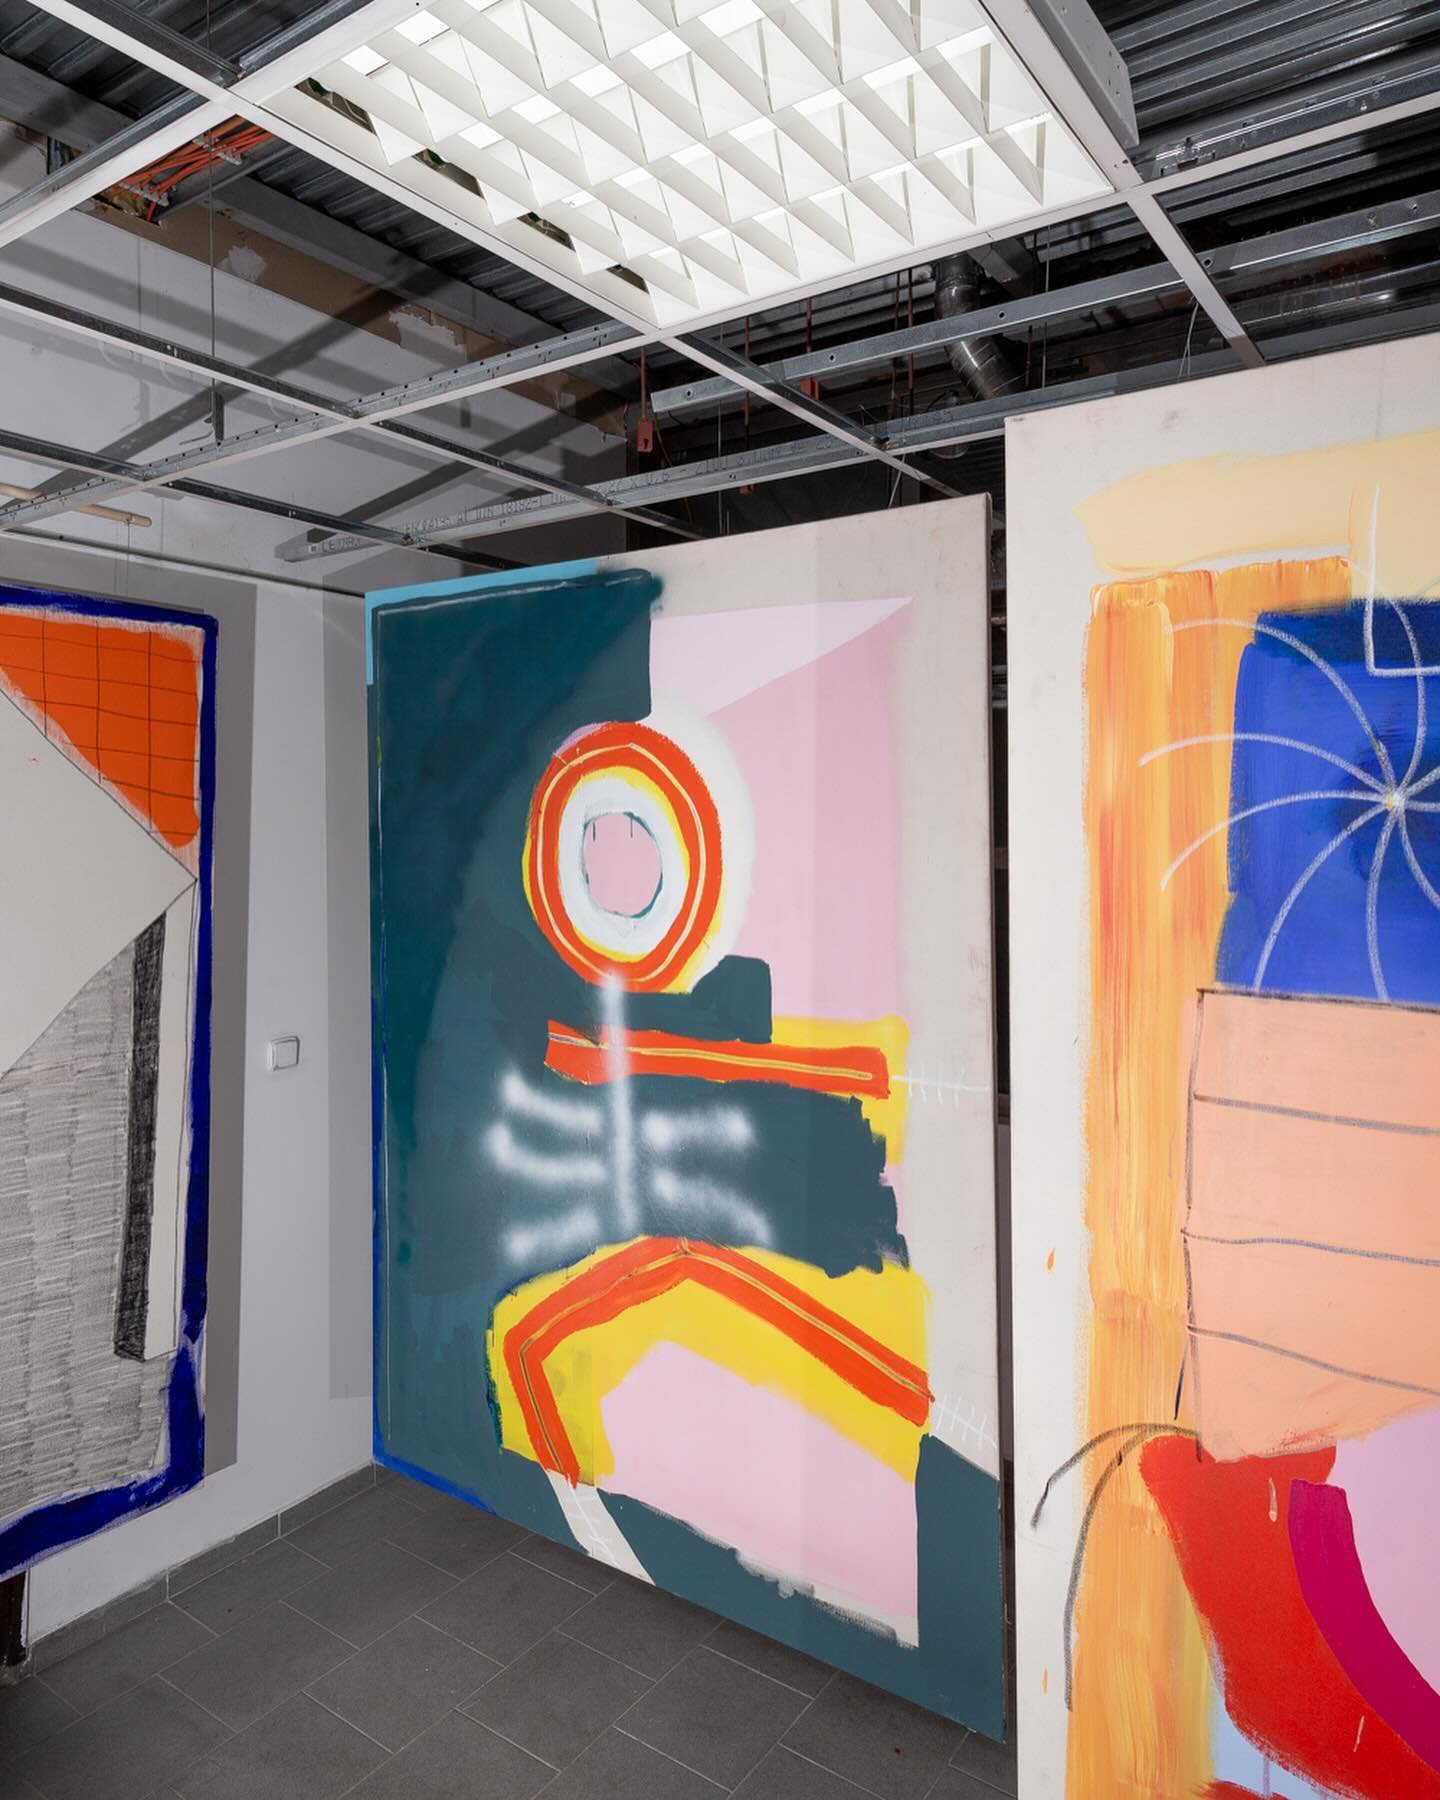 View of current exhibition at HIDDEN AVU of @kraxmilian 

The exhibition Exposed presents new large-format paintings by Maximilian Aaron Mootz. In the raw urban environment in which HIDDEN AVU is situated, the artist returns to his primary sources of